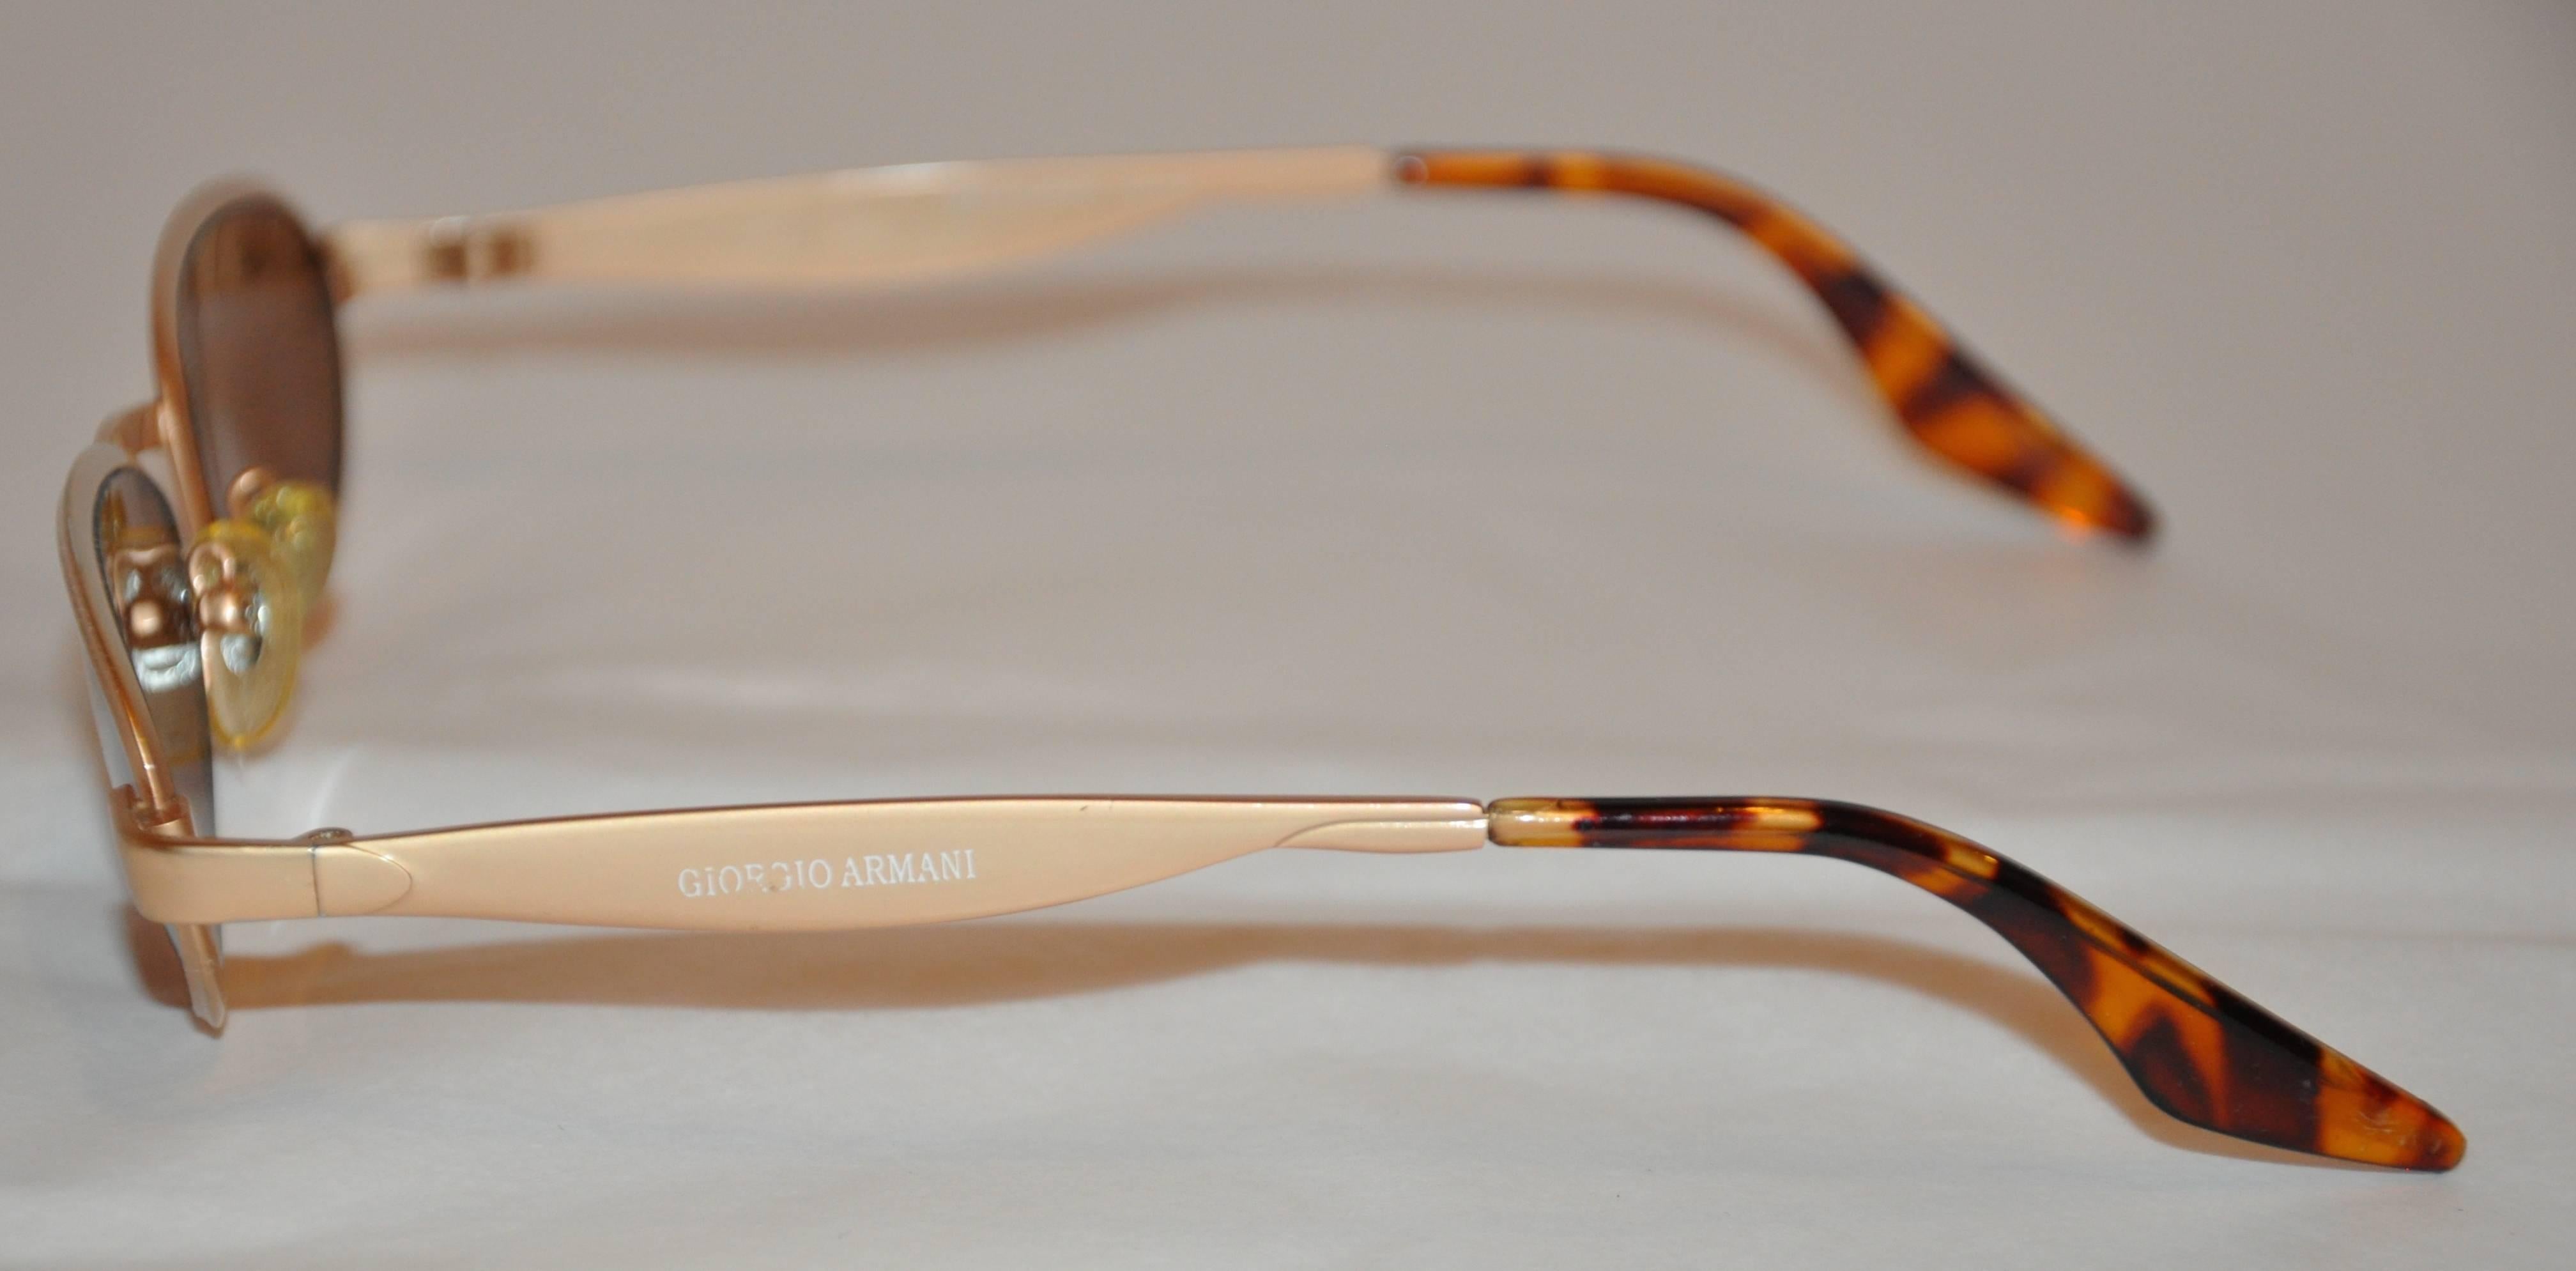           Georgio Armani polished gold hardware accented with tortoise shell  measures 5 1/2